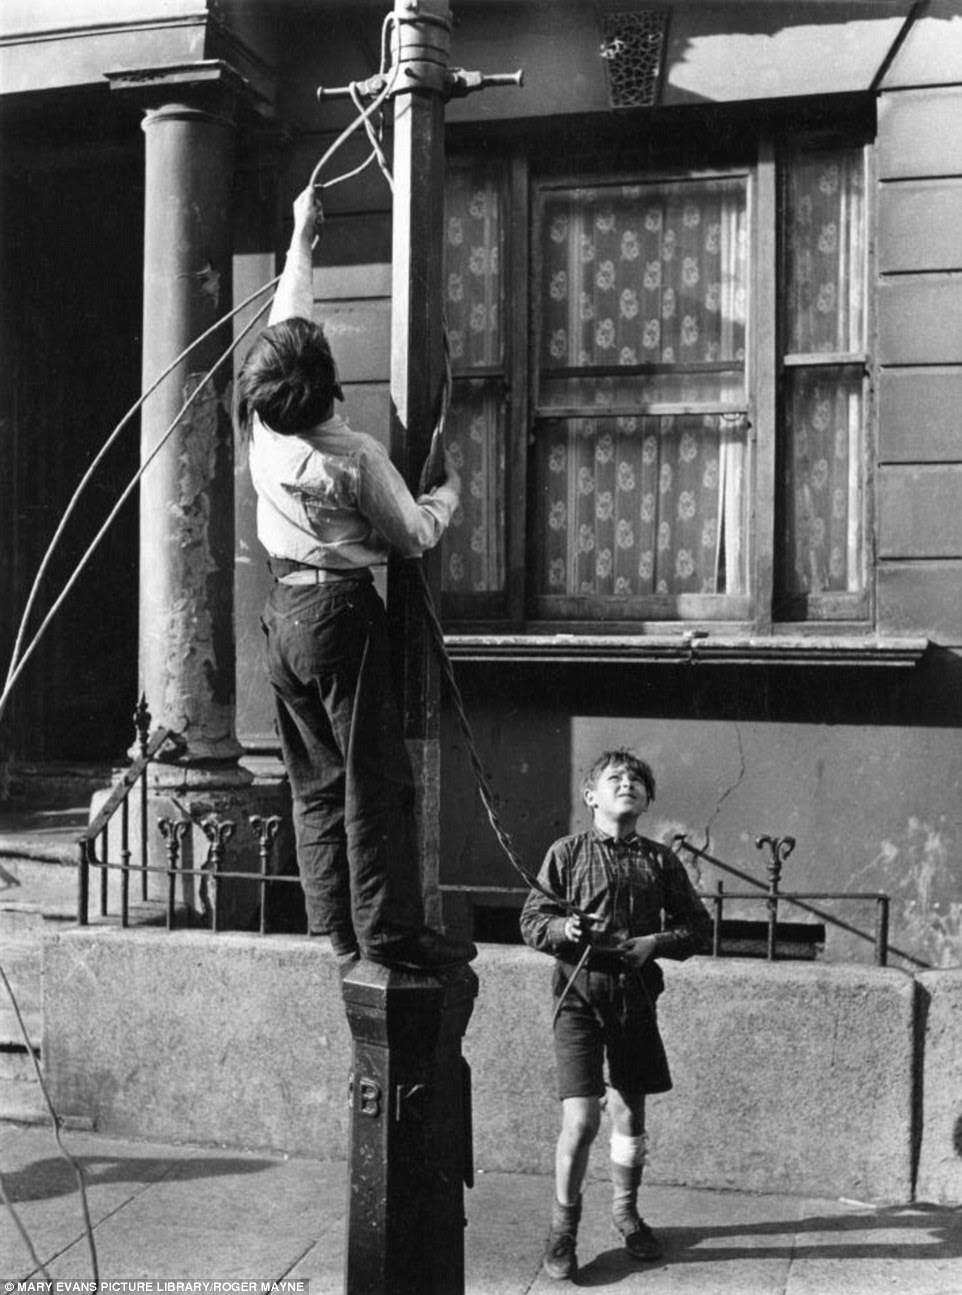 A boy clambers up a lamppost to tie some rope so he and his friend can swing off it in Kensington in 1956